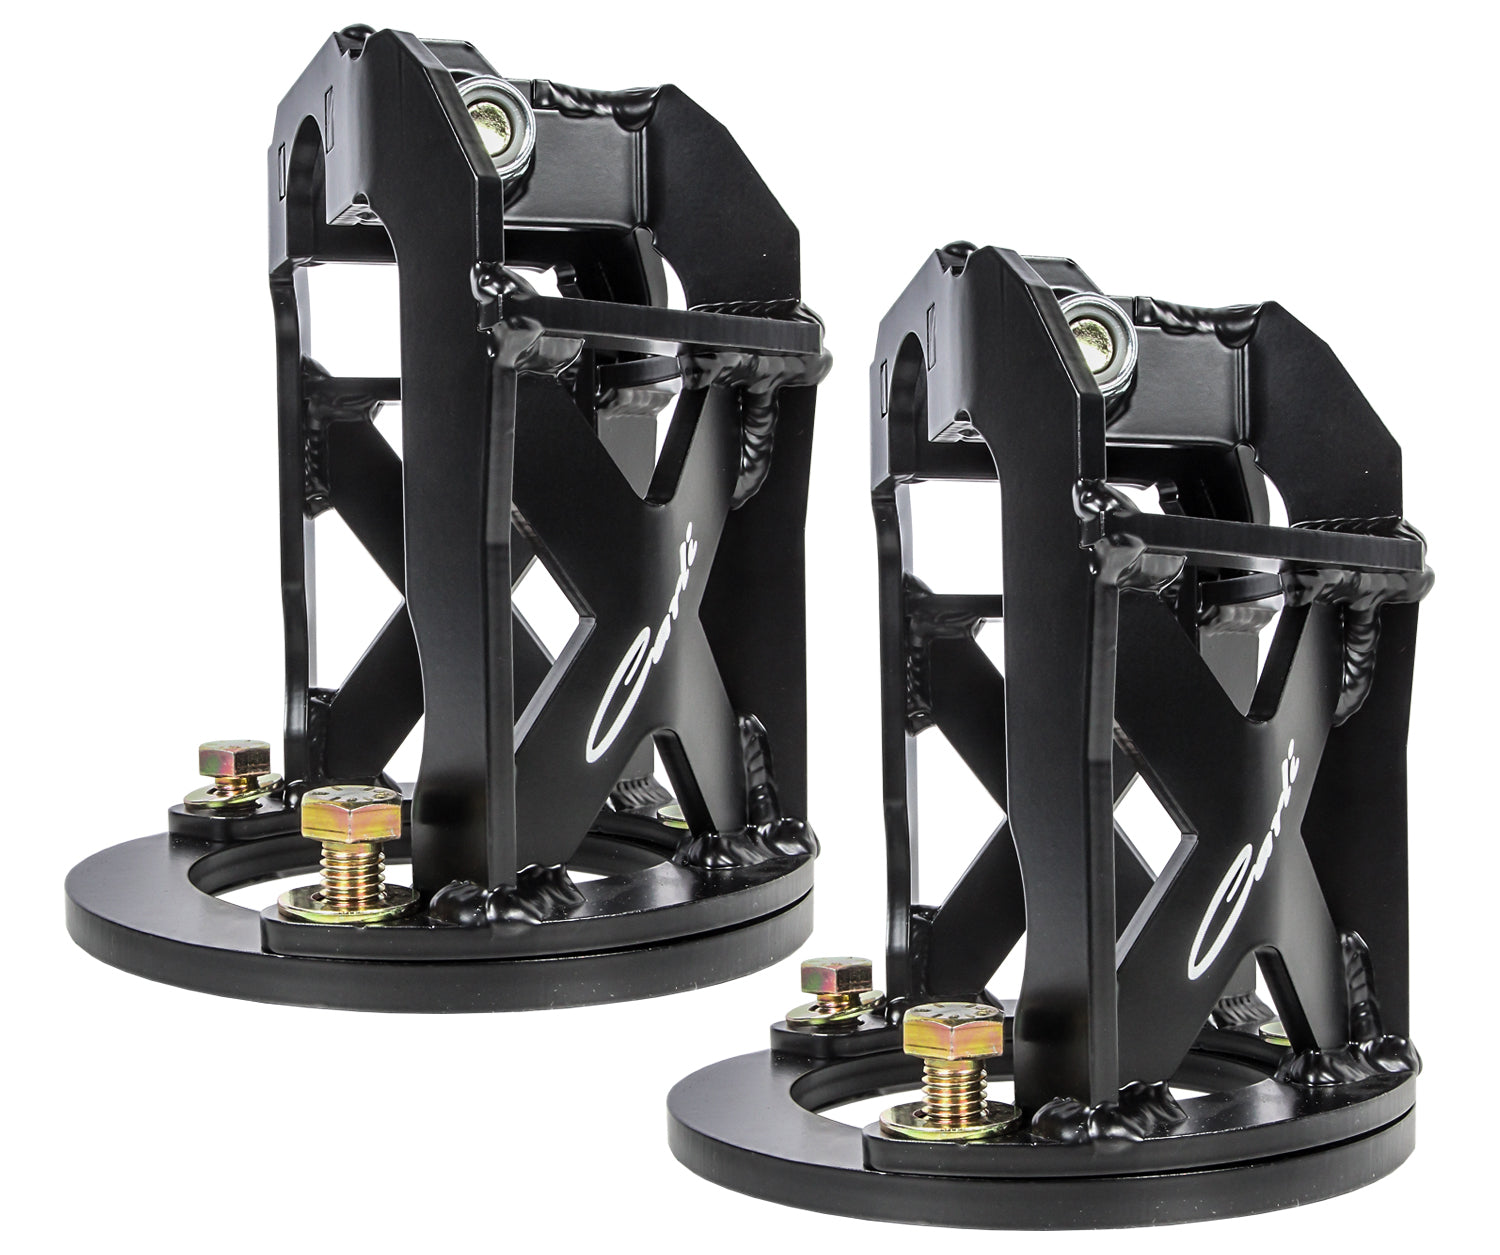 Carli Suspension CS-DFST625 Fabricated Slide-Over Shock Tower - 6.25 inch Tall (Extended Travel Application)